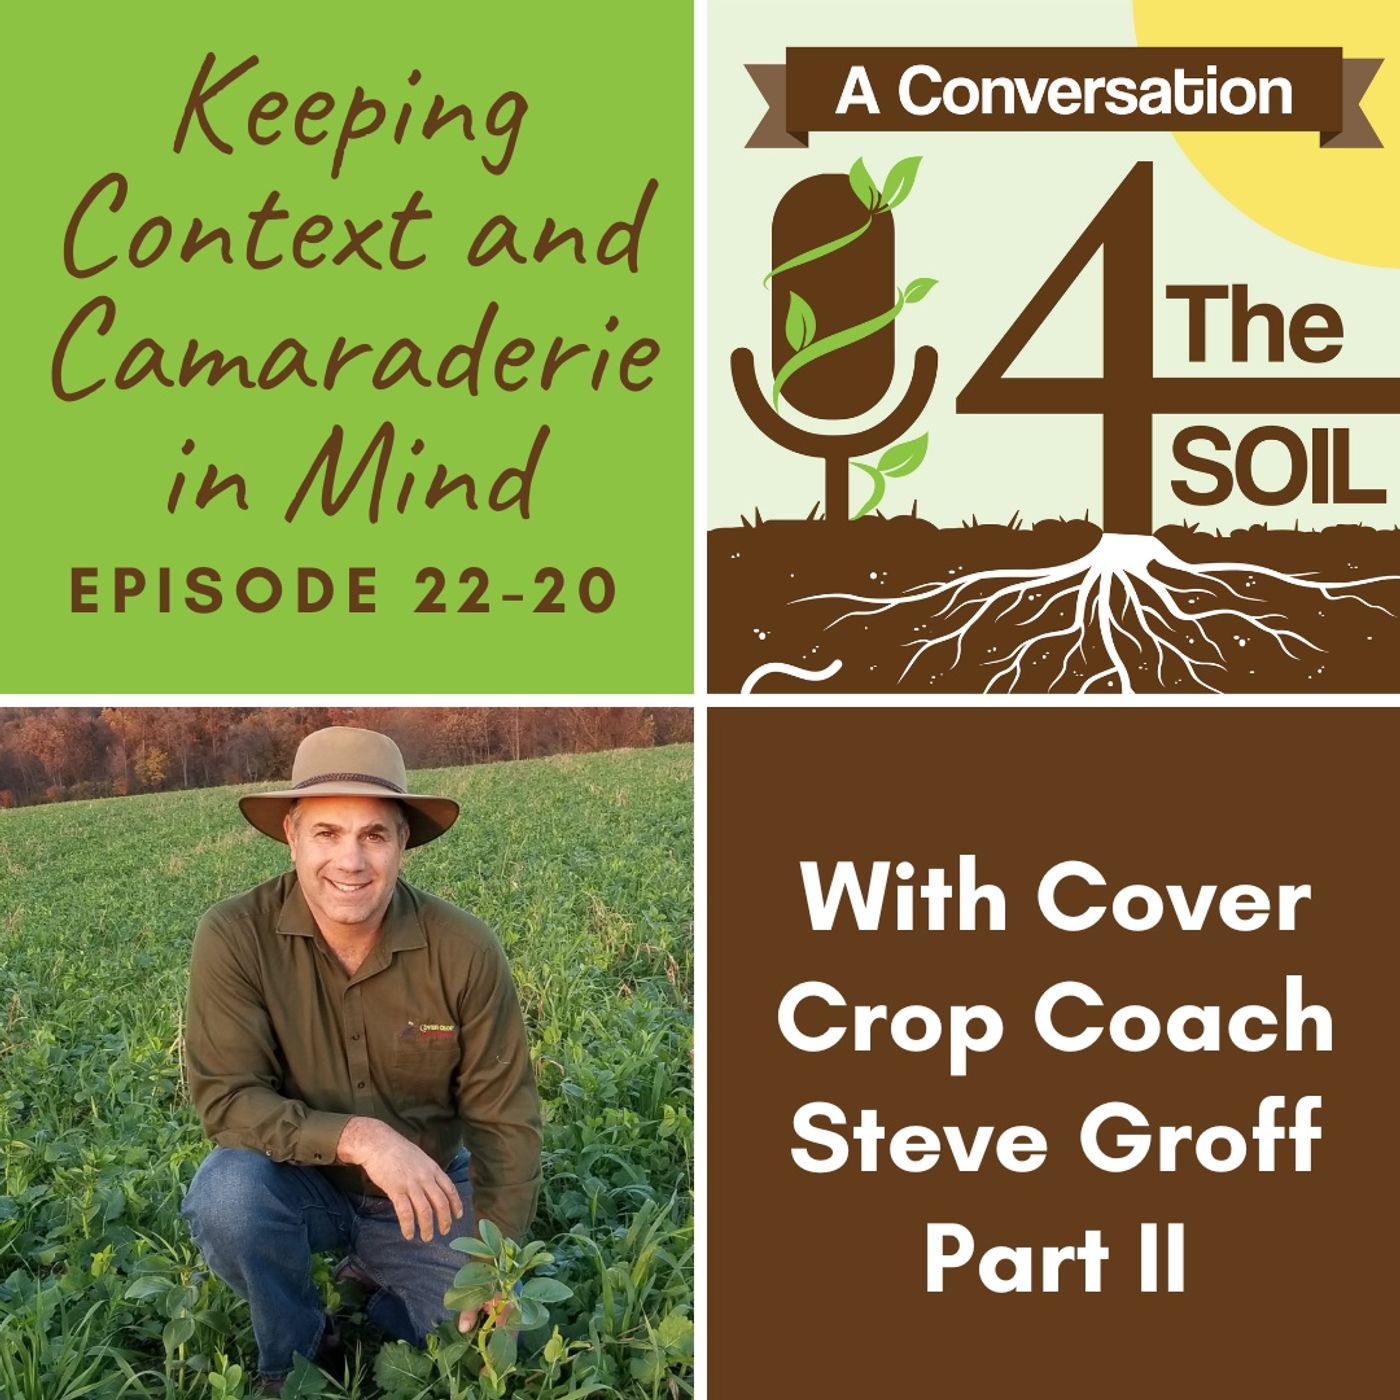 Episode 22 - 20: Keeping Context and Camaraderie in Mind with Cover Crop Coach Steve Groff Part II